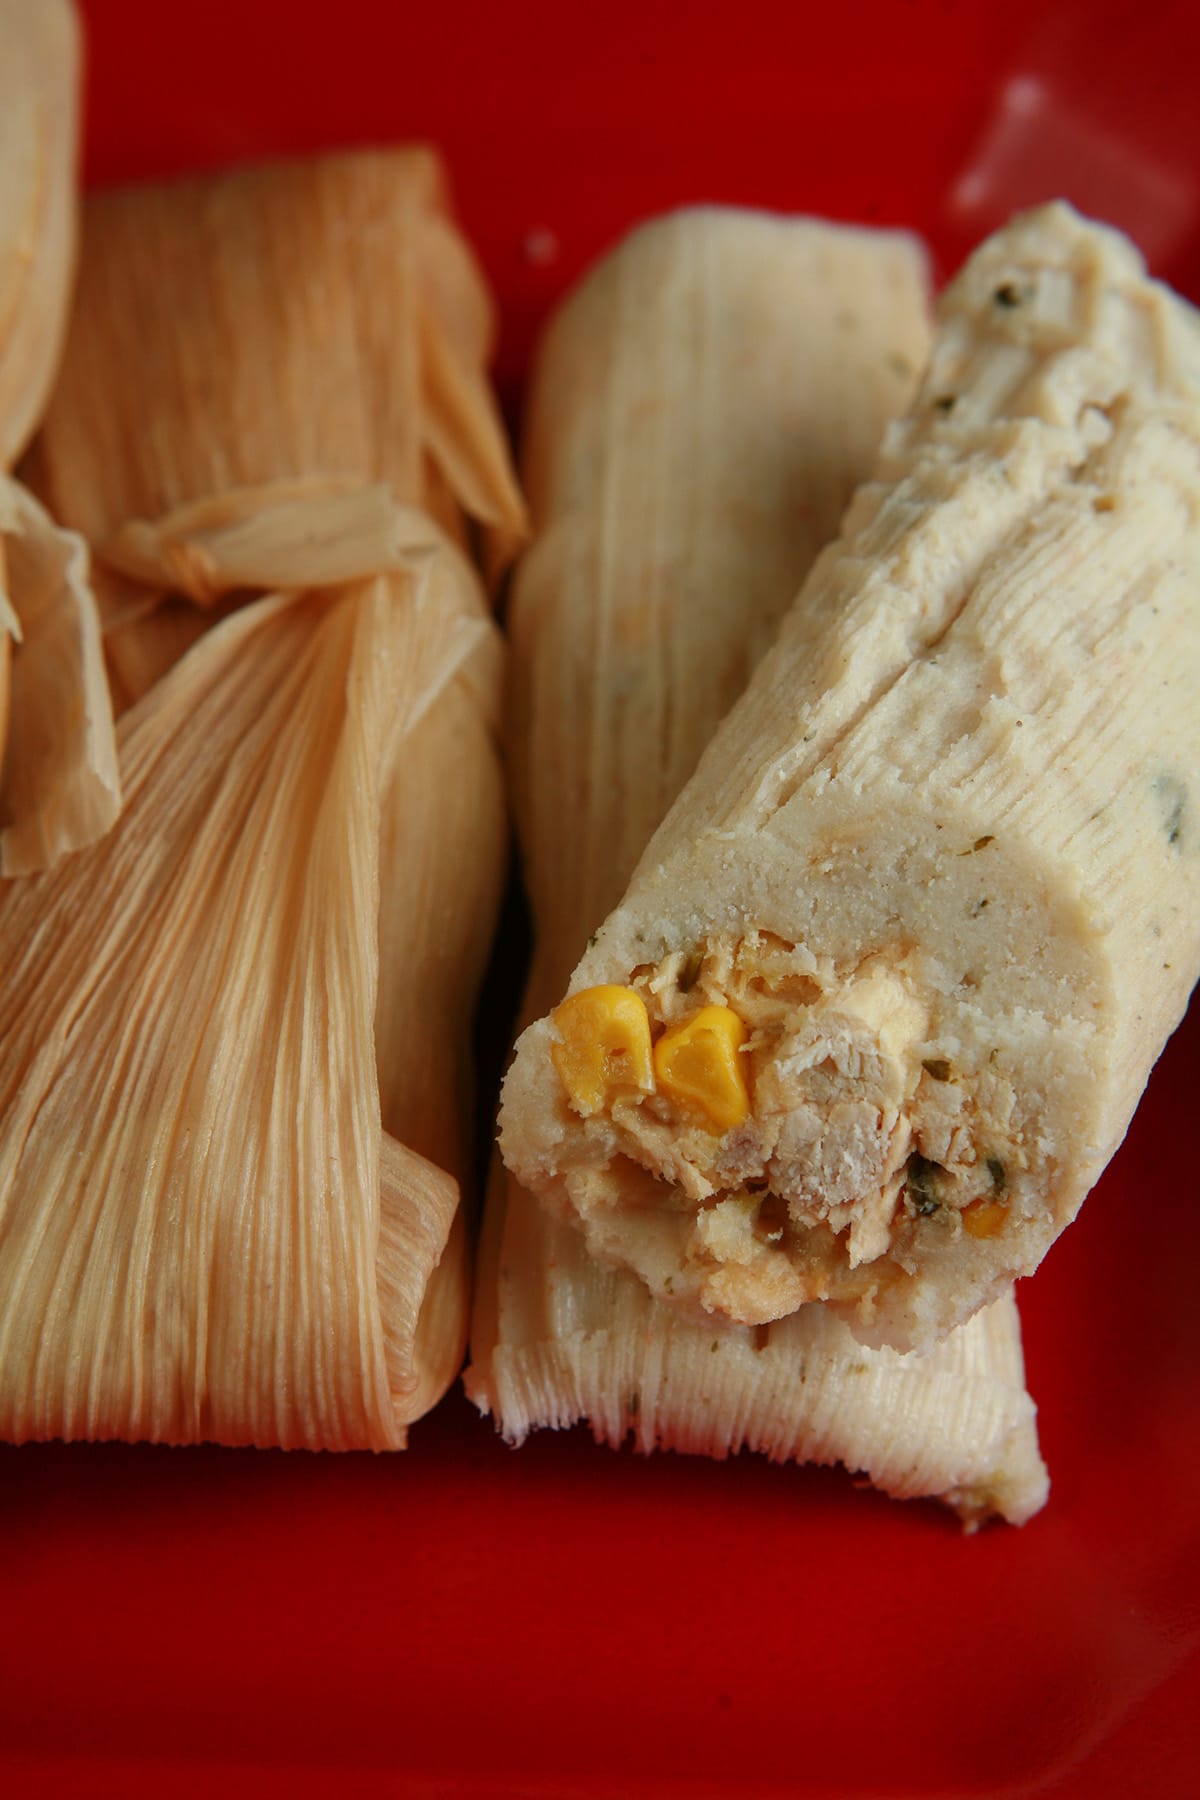 A small pile of salsa verde tamales on a red plate.